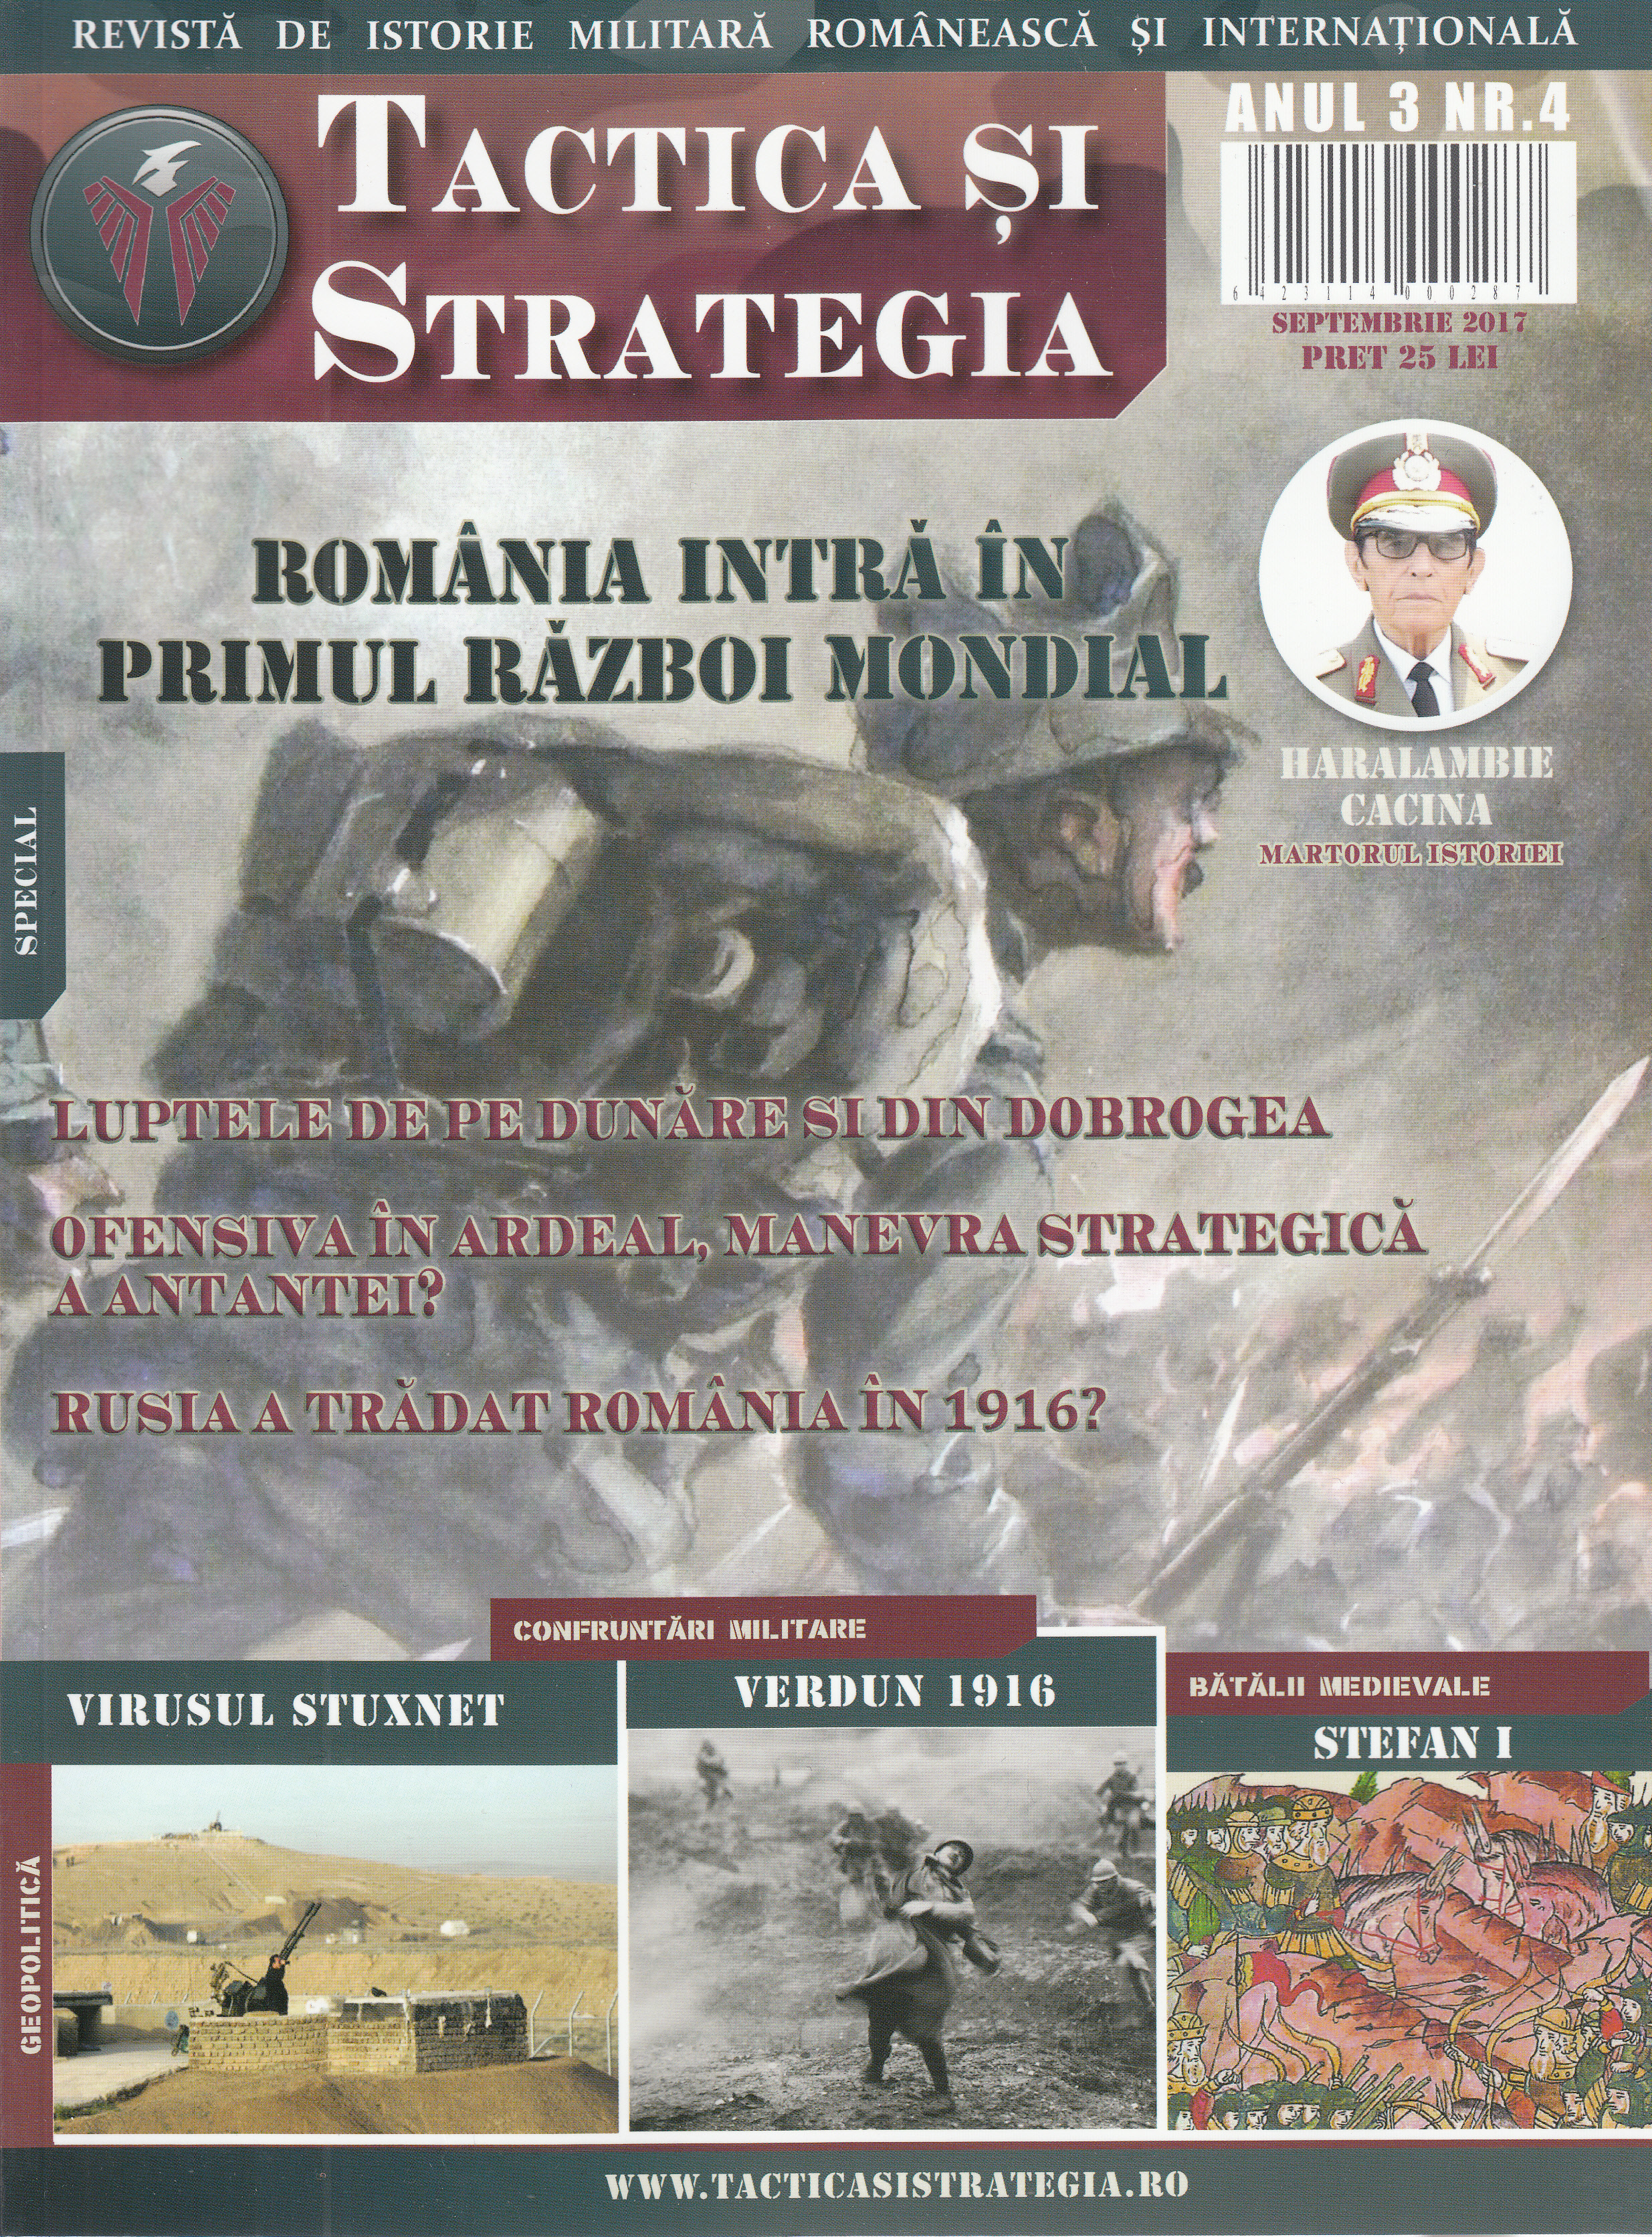 Tactica si strategia Nr. 4 -  Septembrie 2017